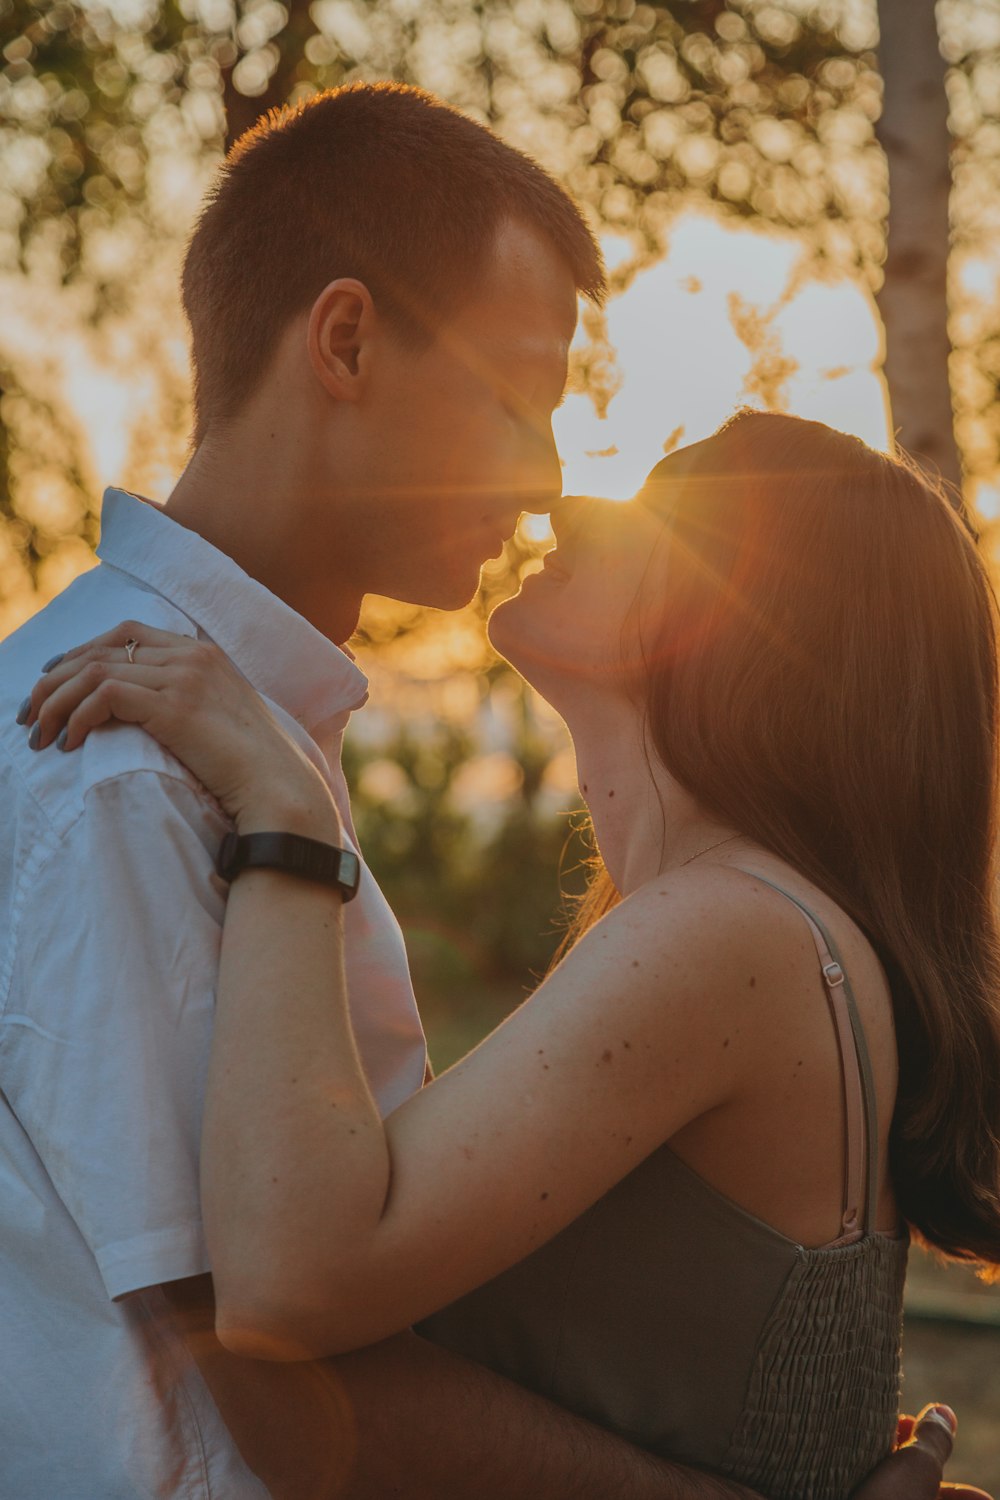 man in white suit kissing woman in white sleeveless dress during sunset